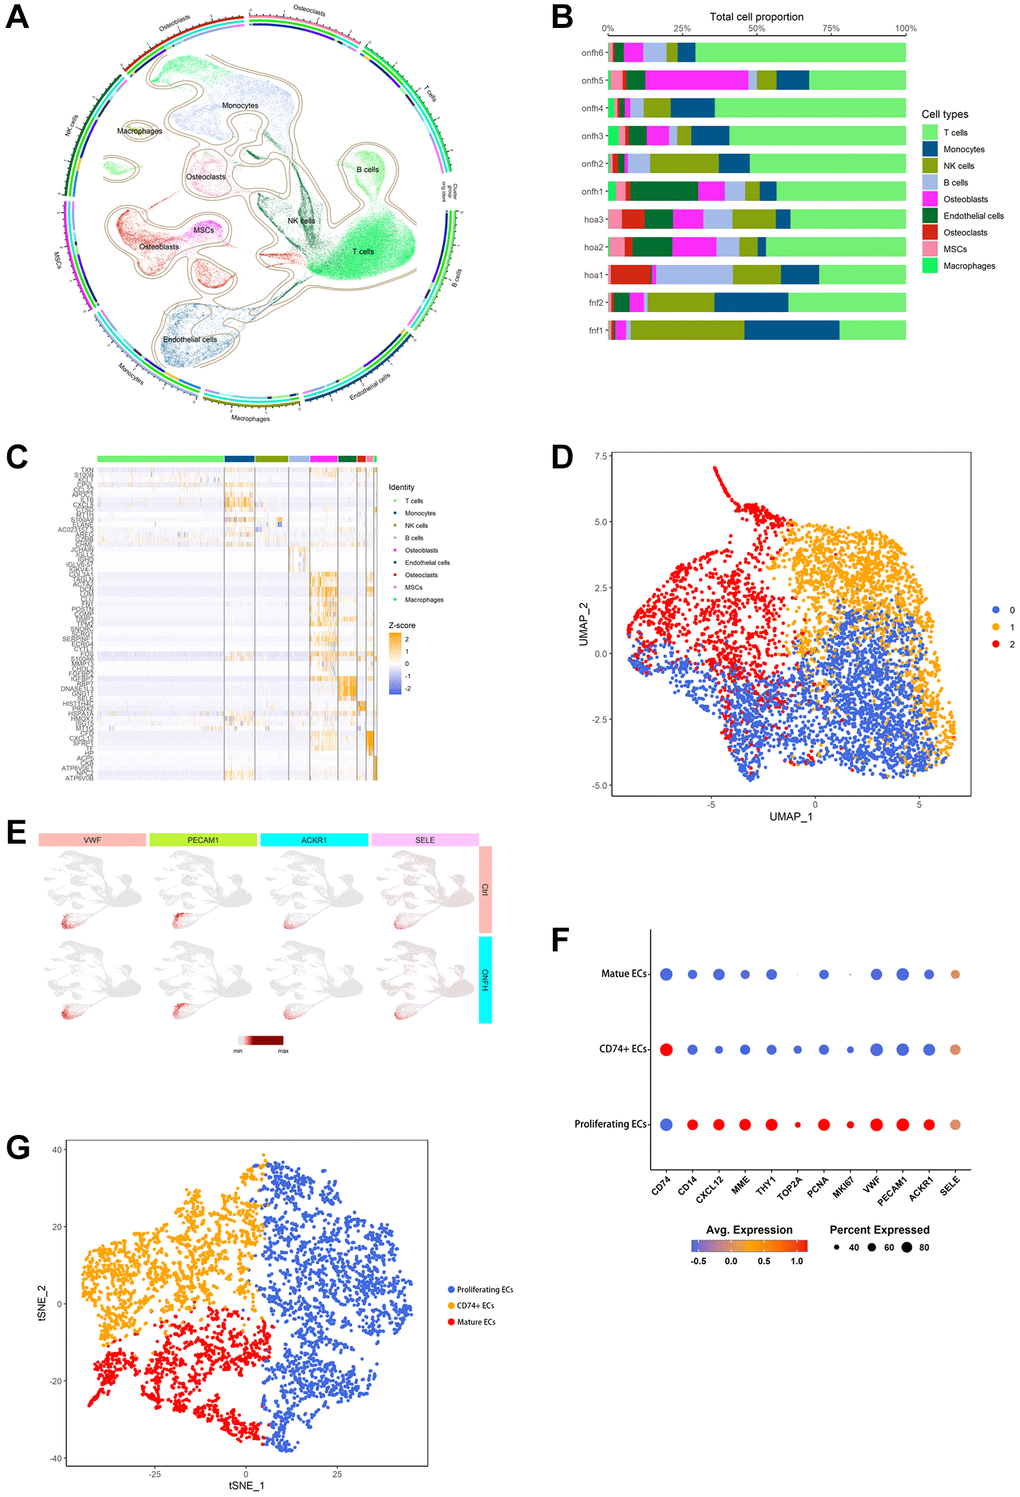 scRNA-seq was used to analyze and identify different cell types and EC clusters. (A) Cell type annotation of 9 clusters. (B) The percentage of clusters and cell types in each sample was represented on a proportion chart. (C) The heat map shows the top 10 marker genes in each cluster. (D) Two-dimensional plots of UMAP dimensionality reduction of the ECs. (E) ECs signature genes embedded on t-SNE dimension reduction map. (F) Dot plot showing marker genes for ECs subtypes. (G) tSNE shows the color-coded clustering for ECs.